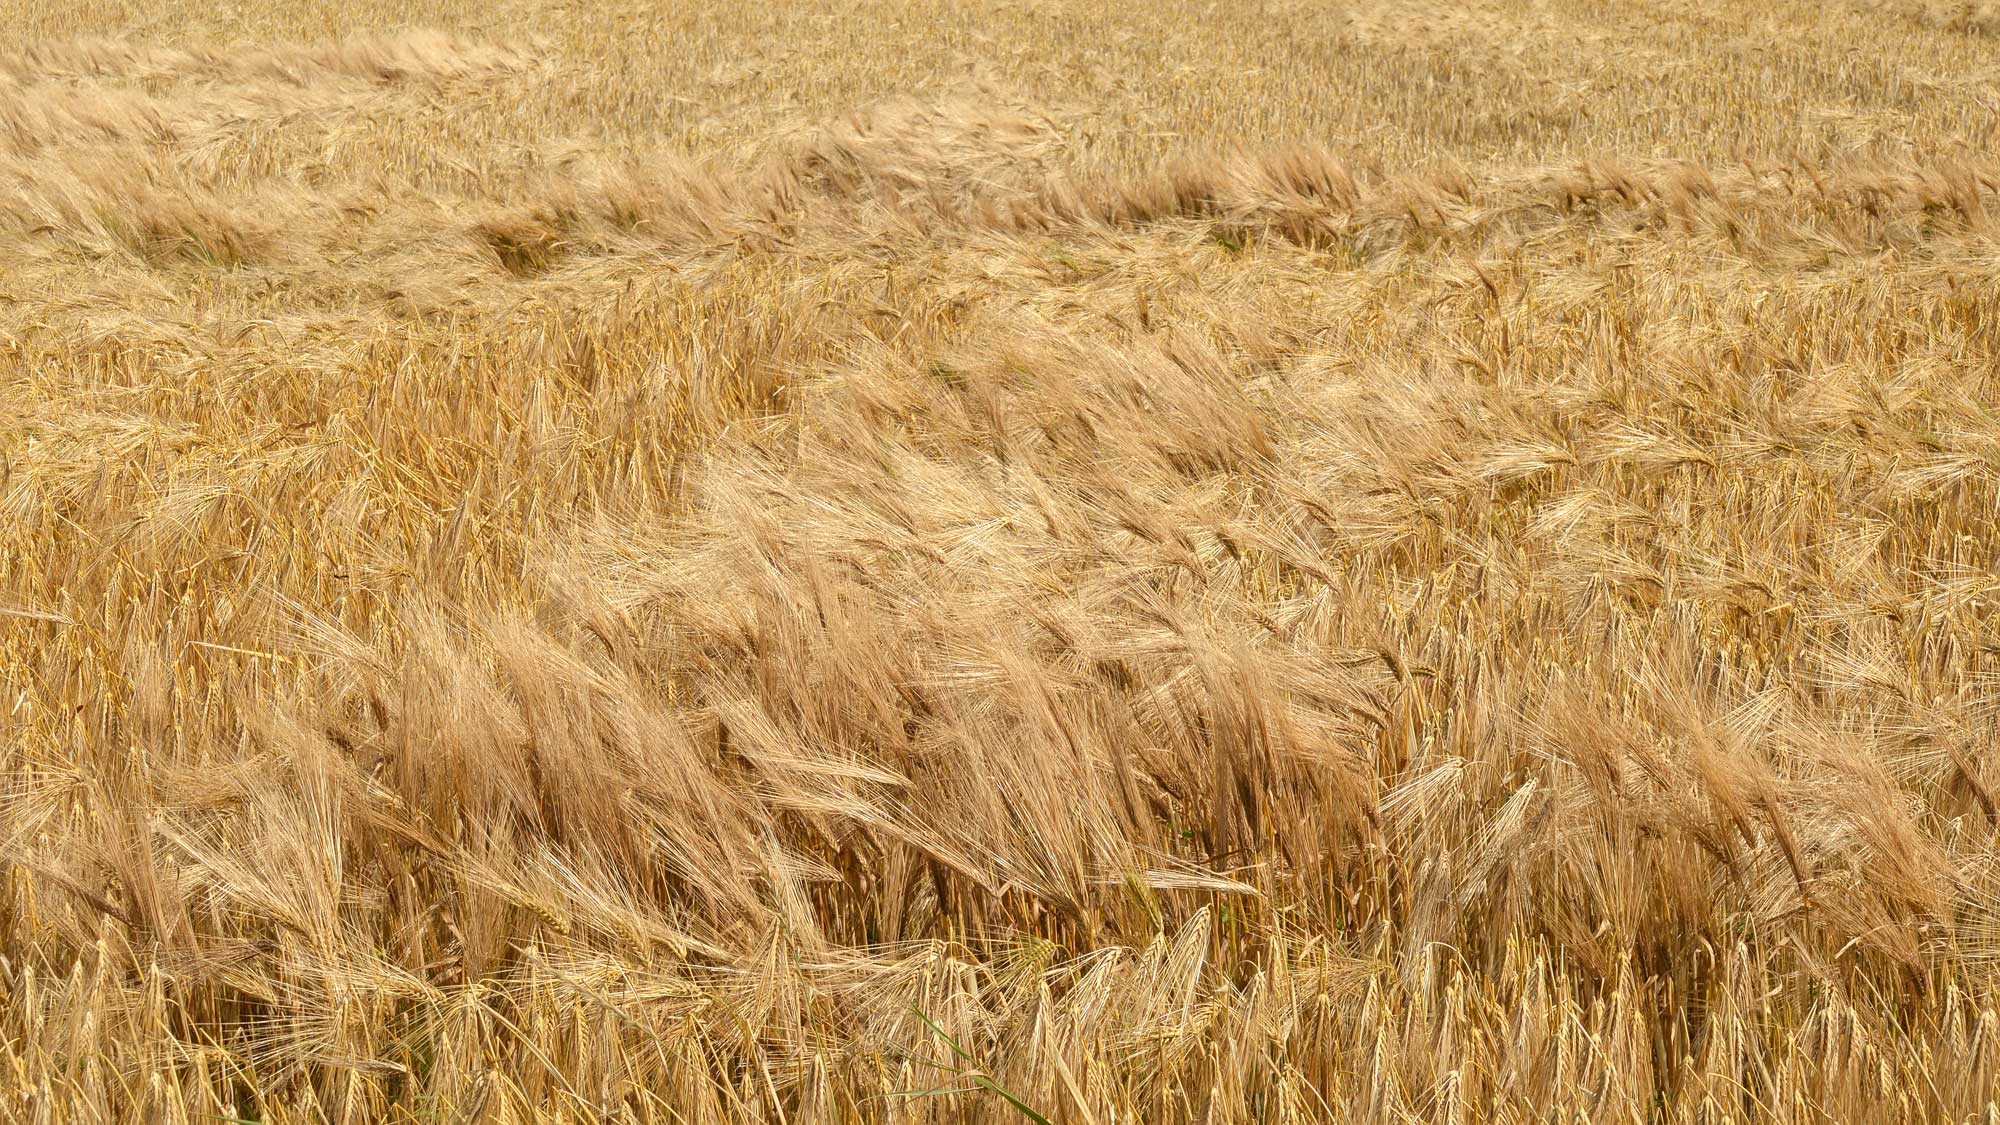 Photograph of a field of barley in Norway. The photo shows a field of golden-brown plants. The awns on the inflorescences of some of the plants are very prominent.